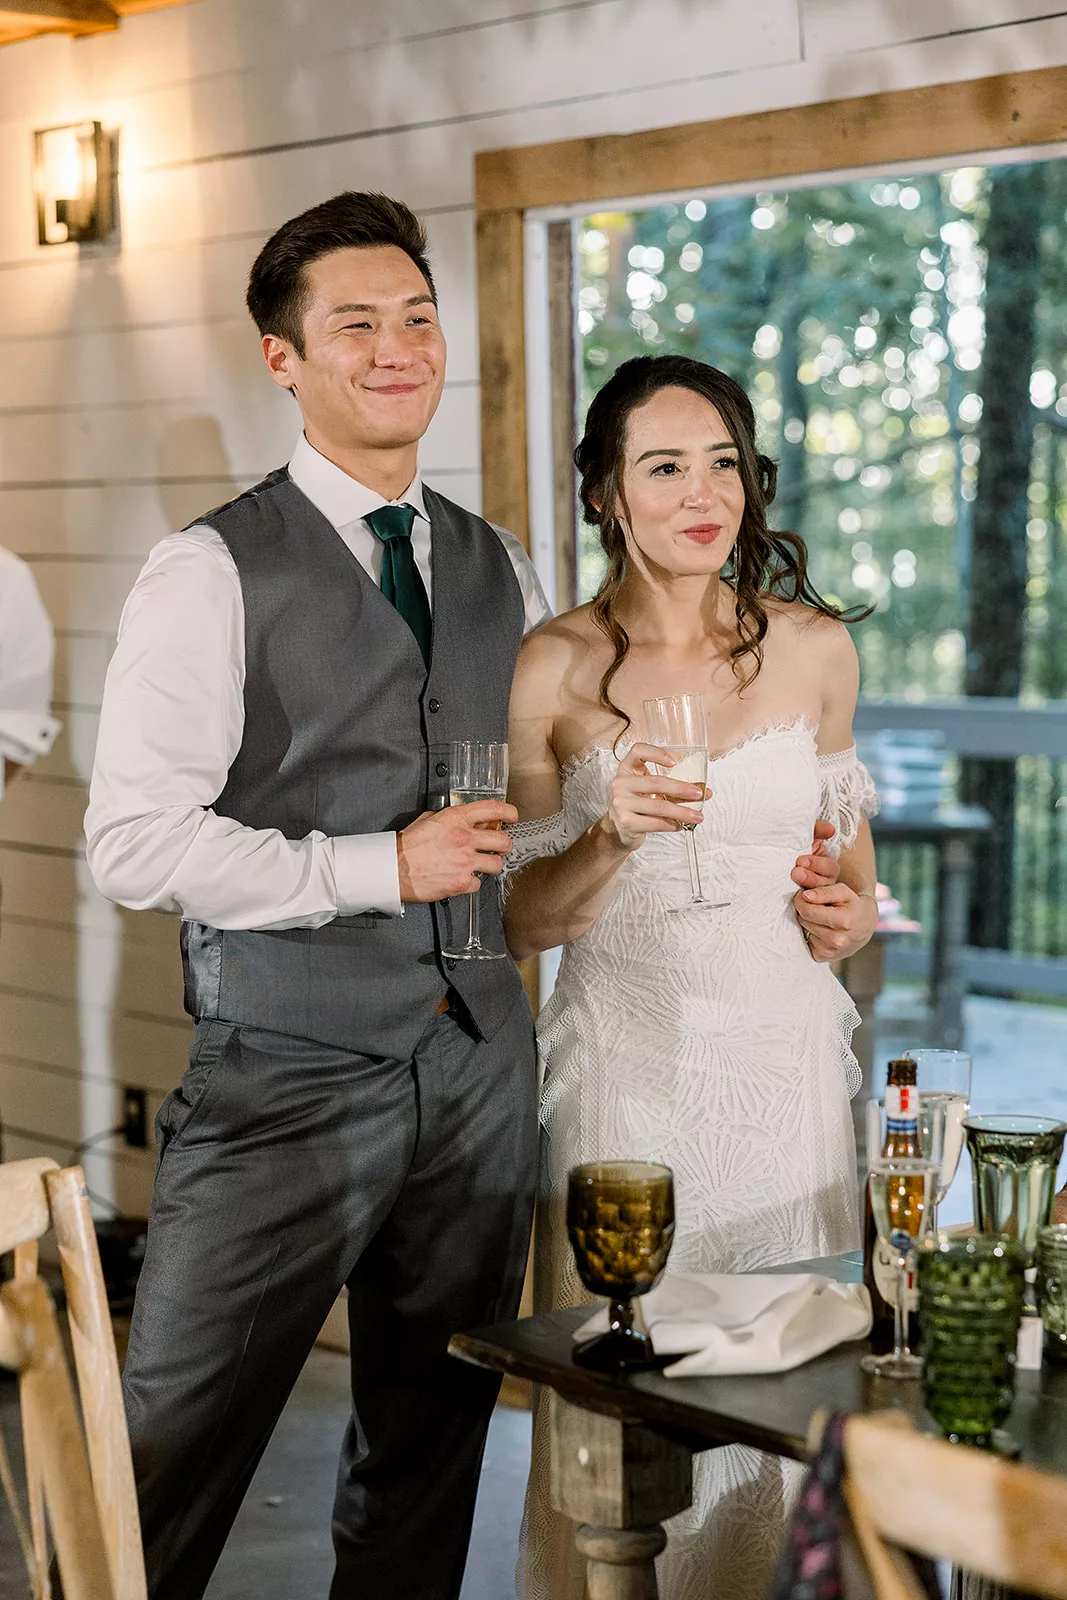 Newlyweds stand together at their reception holding champagne glasses